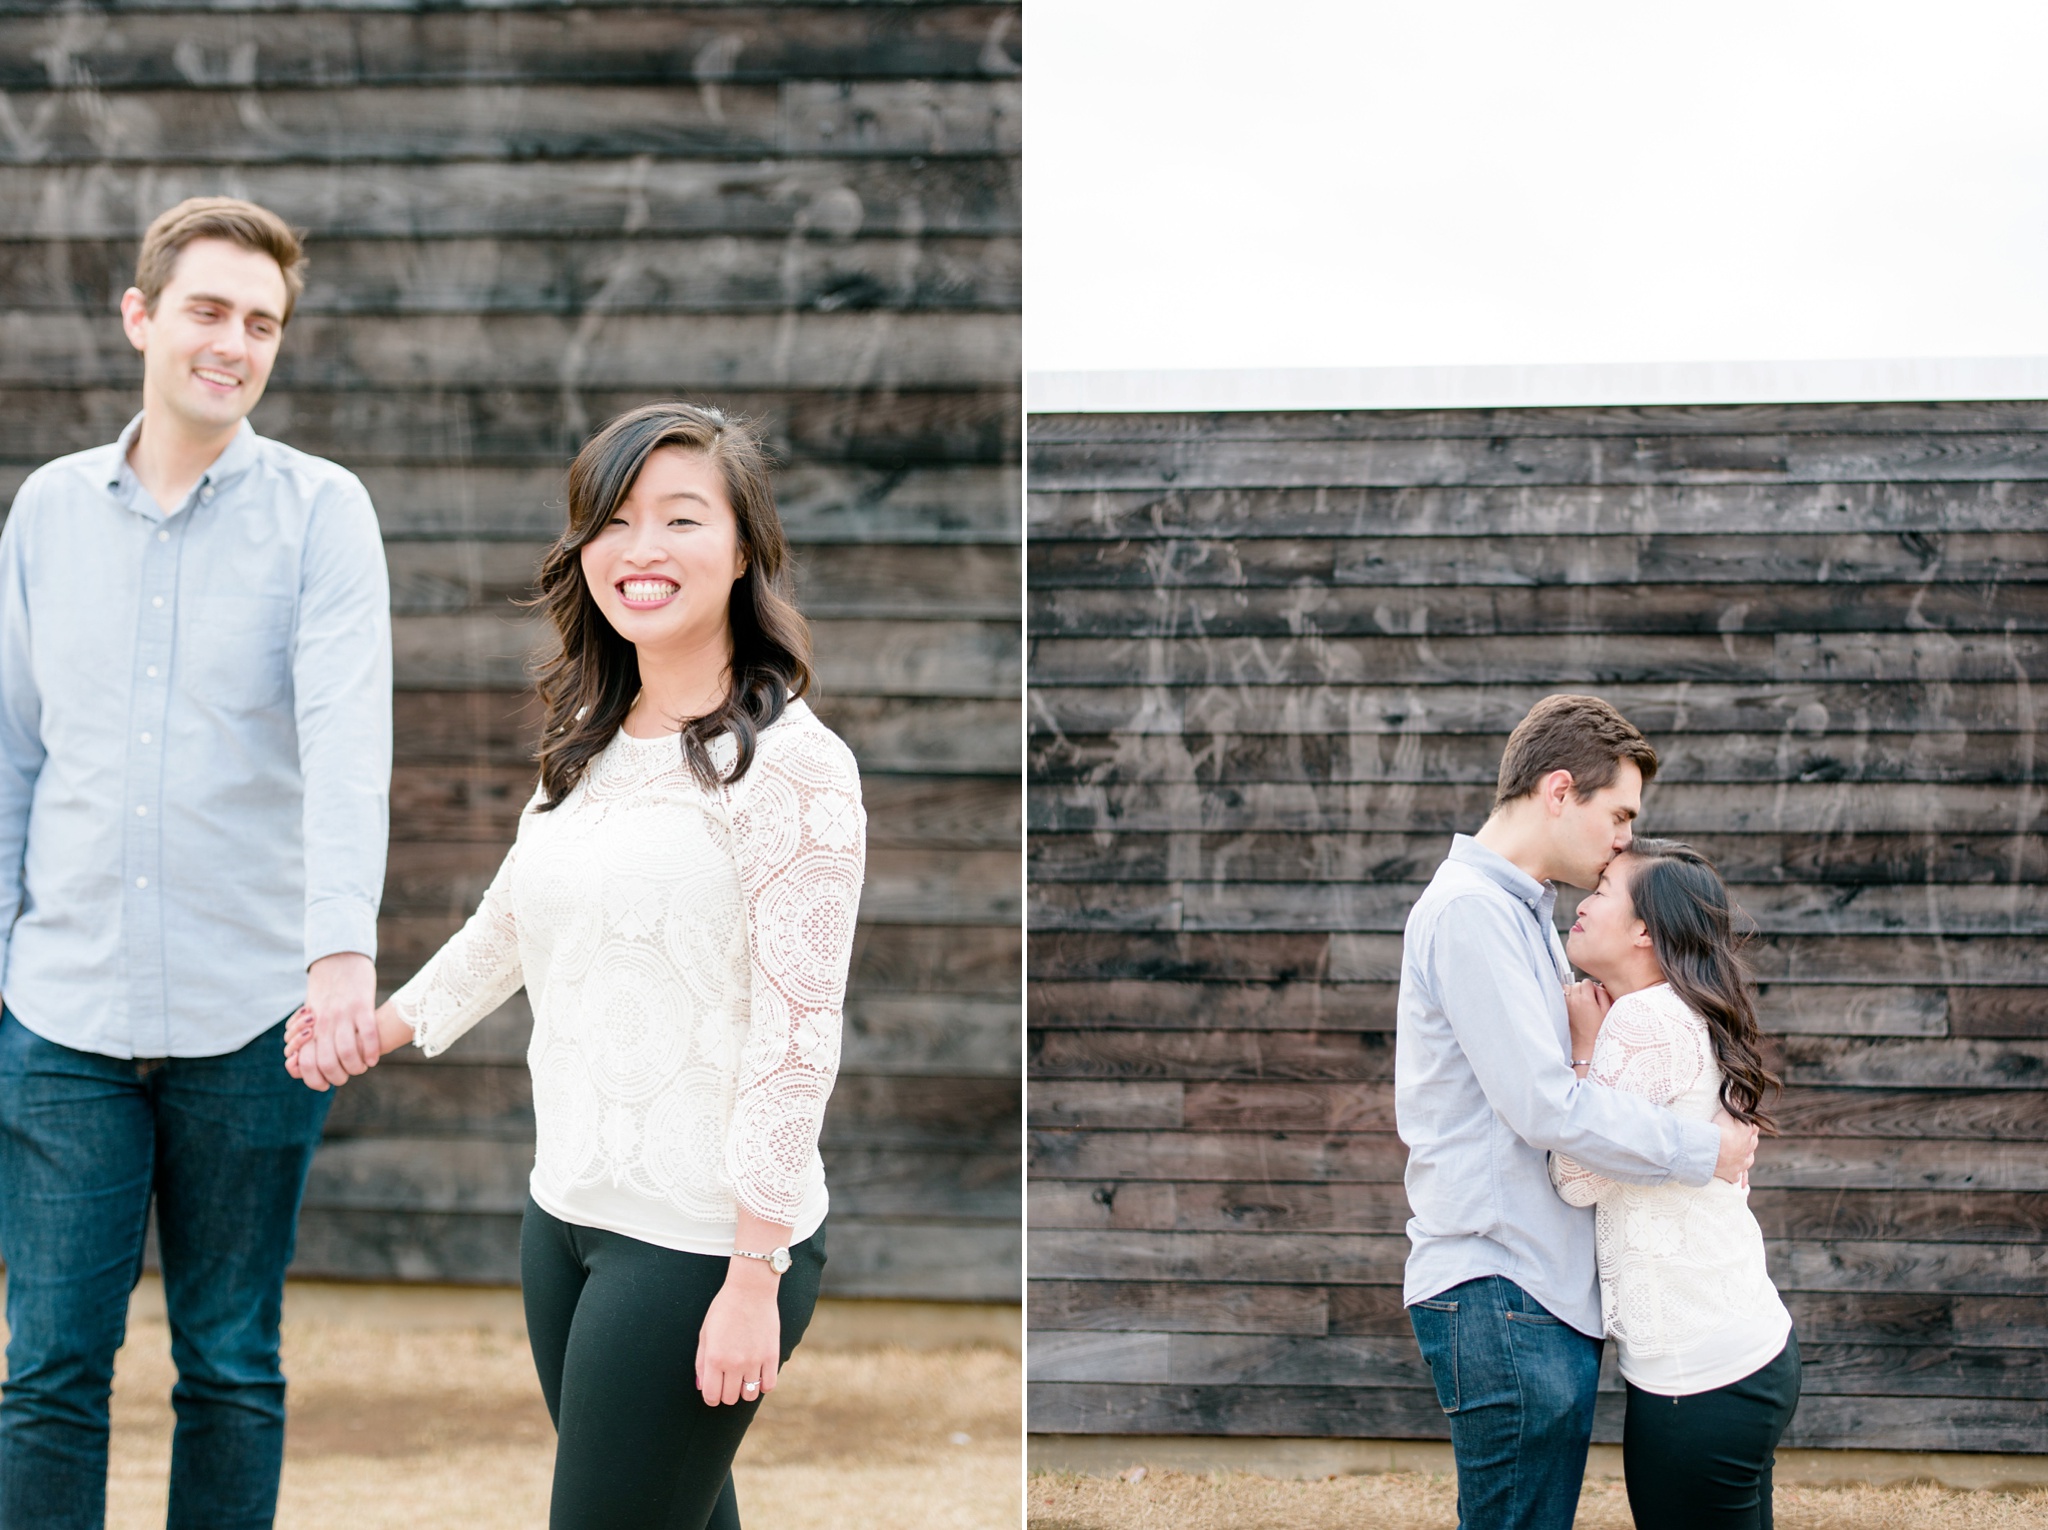 Downtown Nice to Have You in Birmingham Engagement Session| Birmingham Alabama Wedding Photographers_0008.jpg